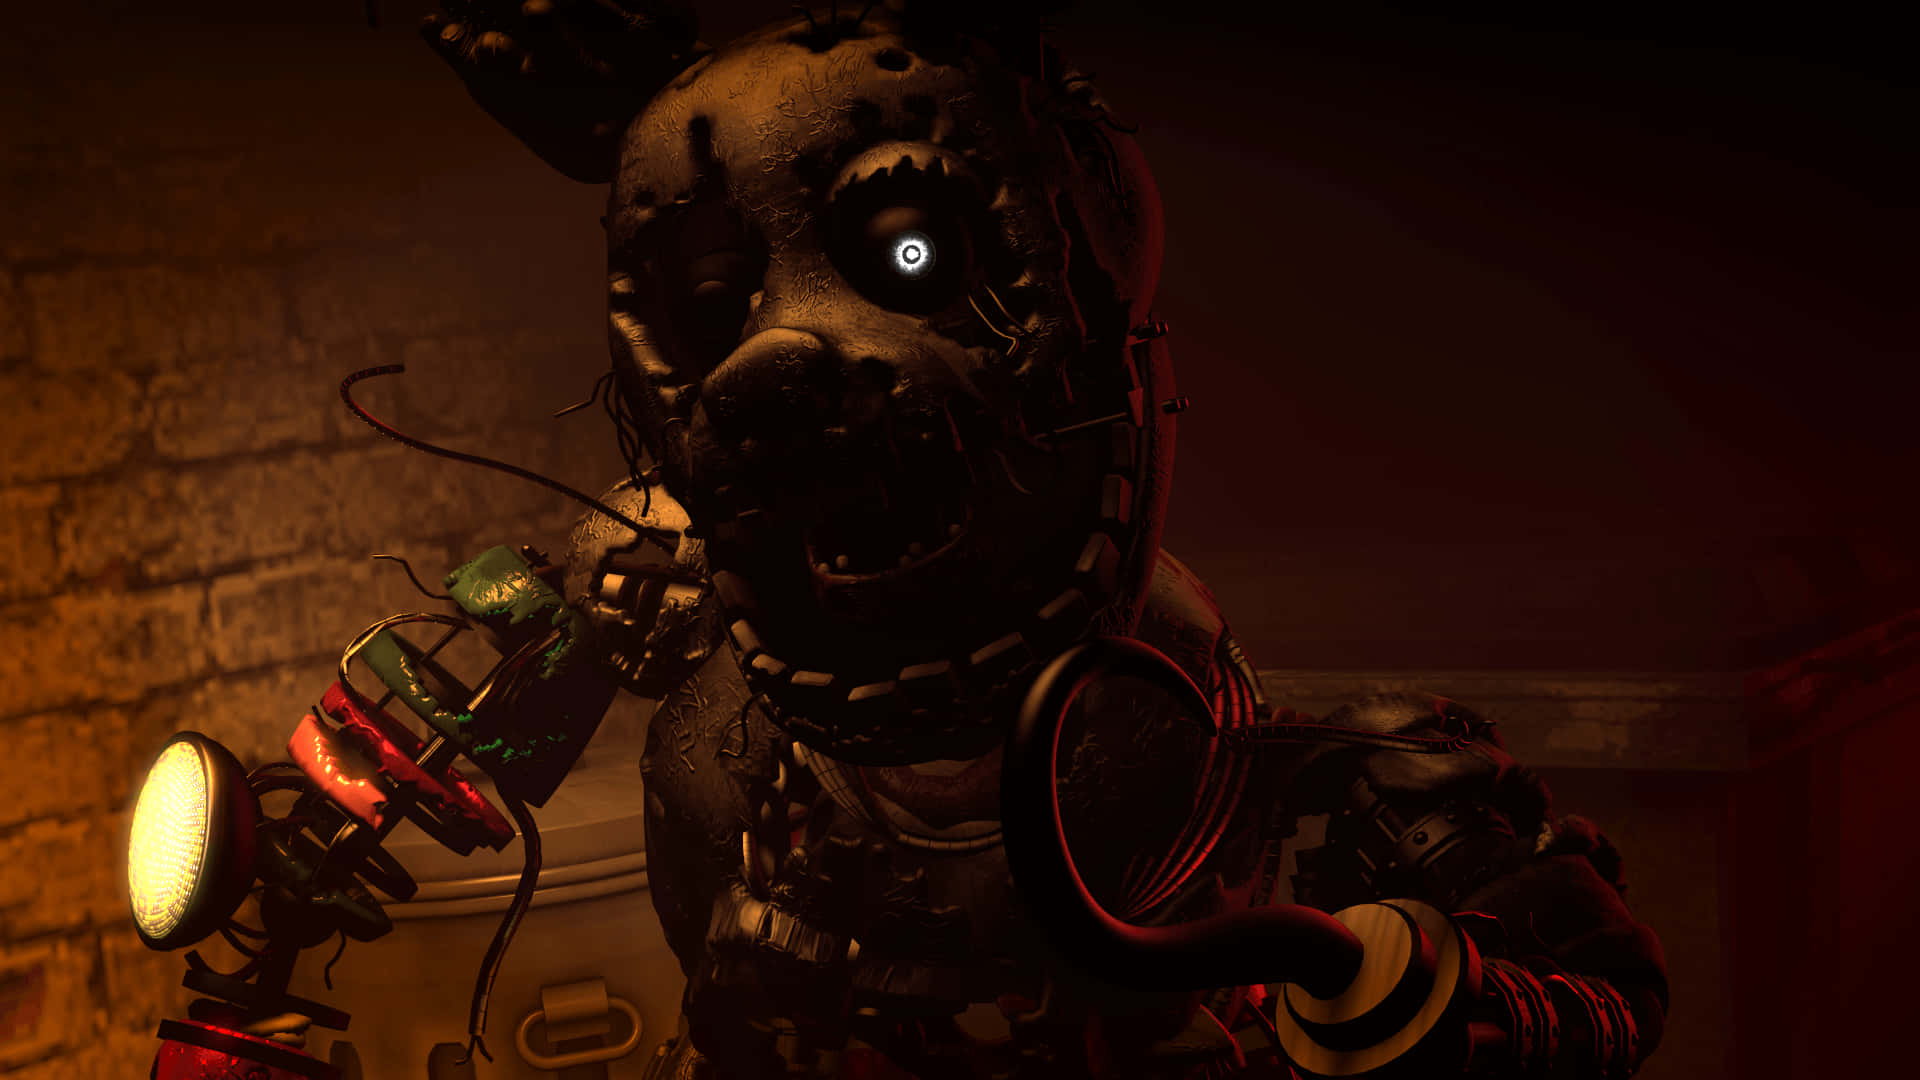 Intimidating Scraptrap on a Grungy Background Wallpaper